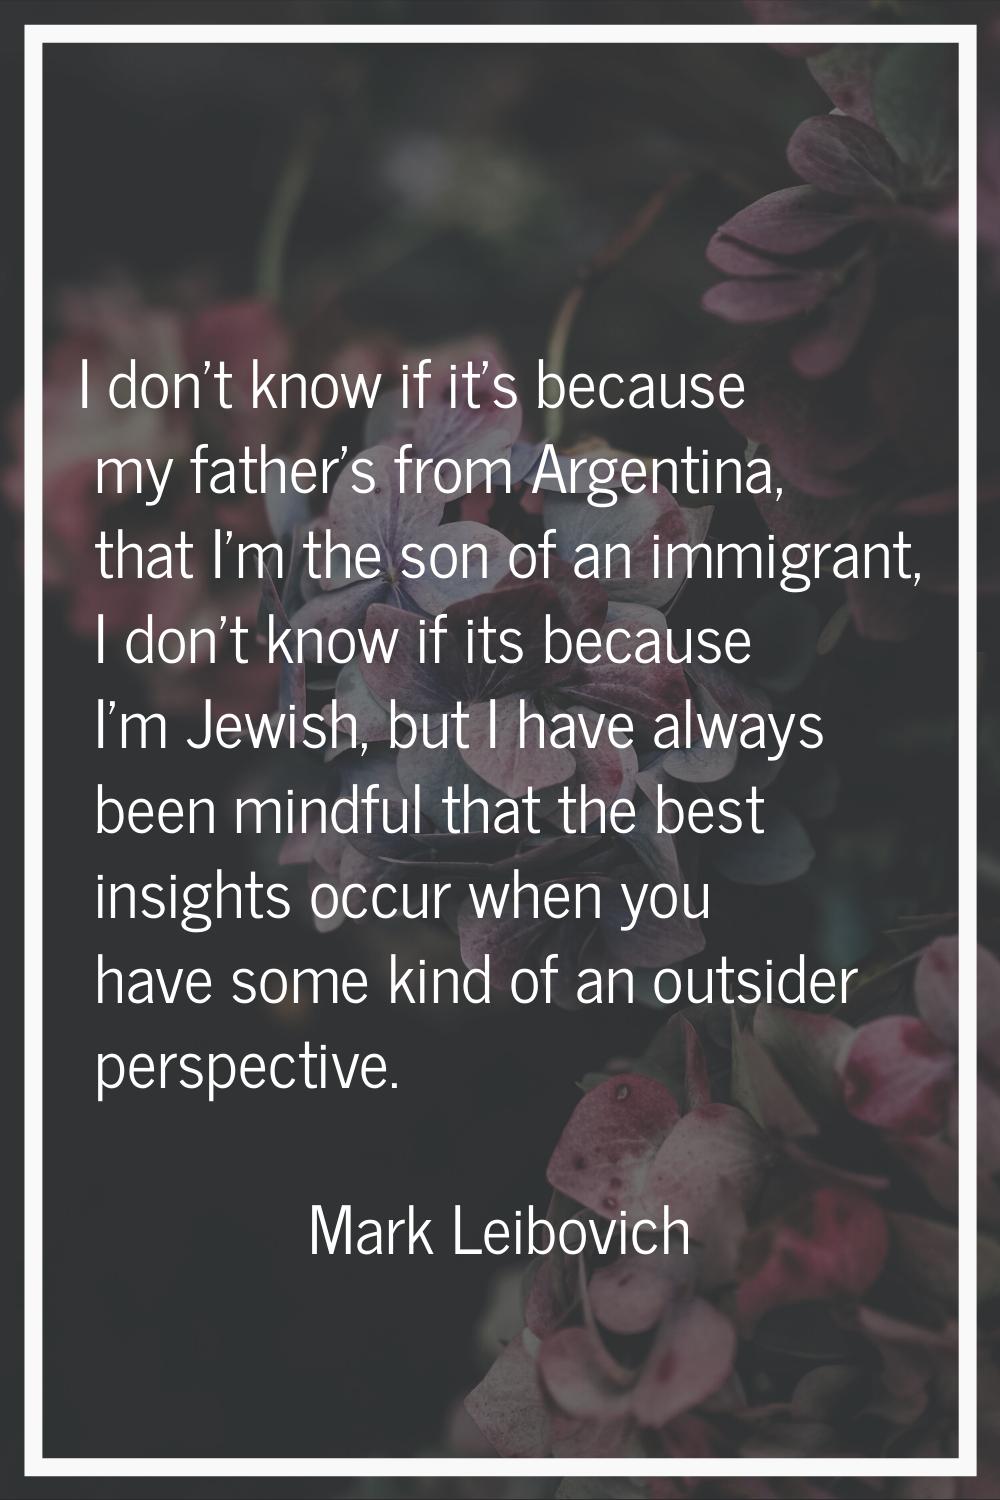 I don't know if it's because my father's from Argentina, that I'm the son of an immigrant, I don't 